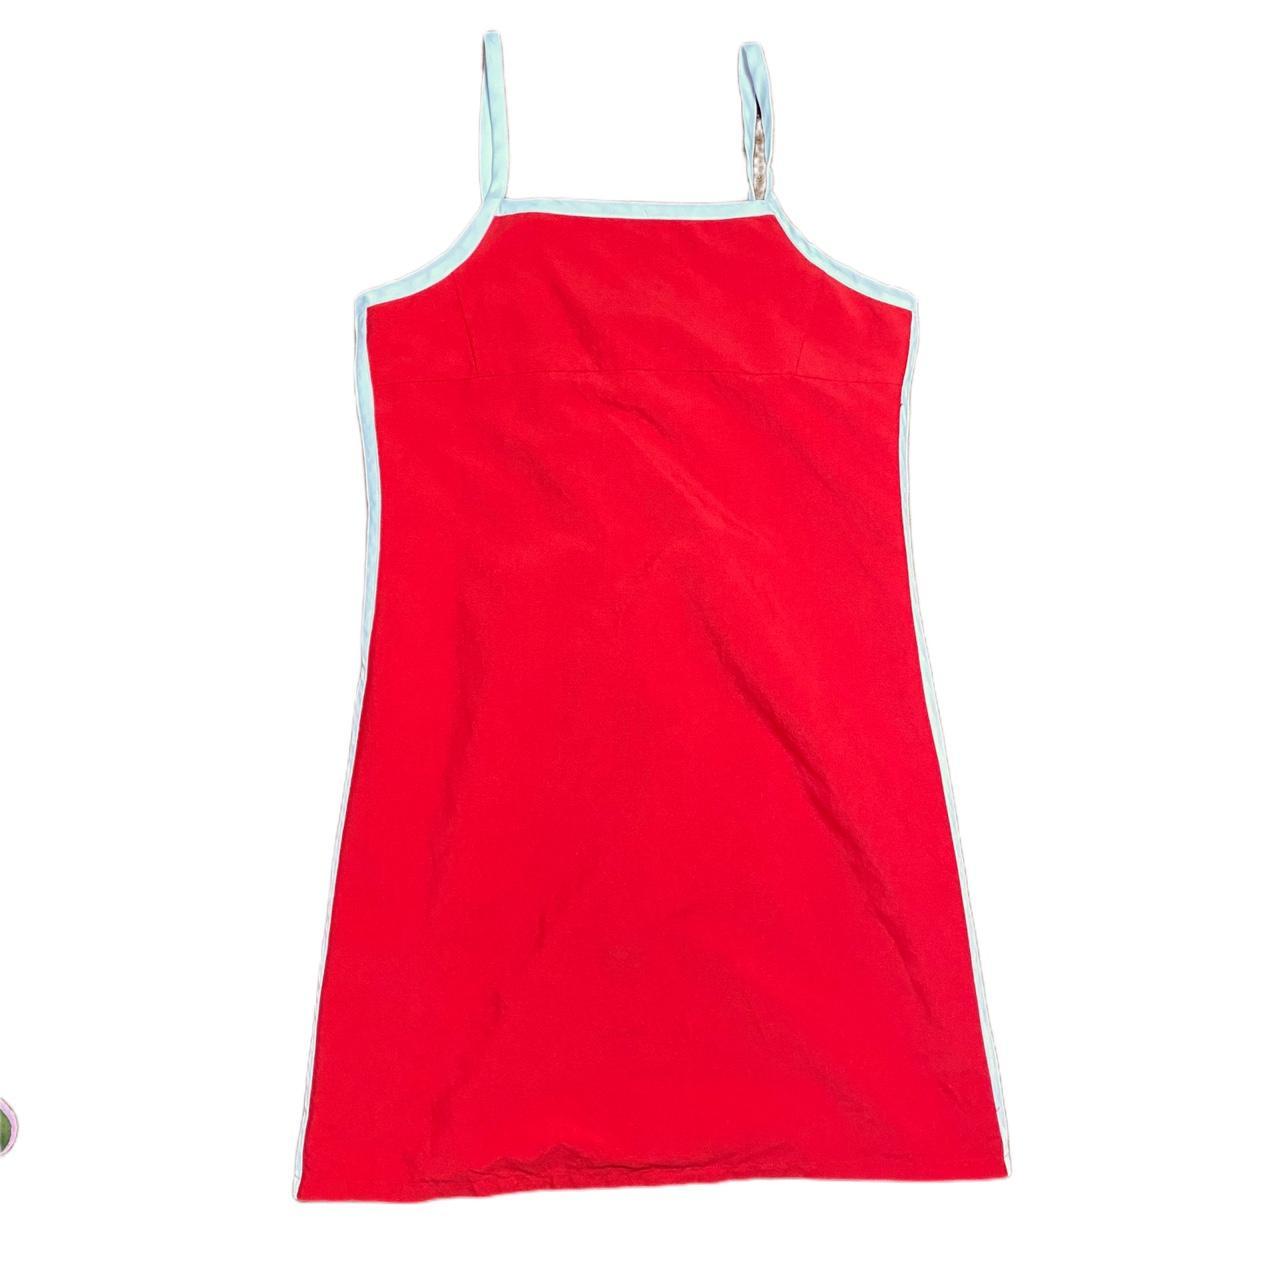 Mossimo Women's Red and Blue Dress (3)